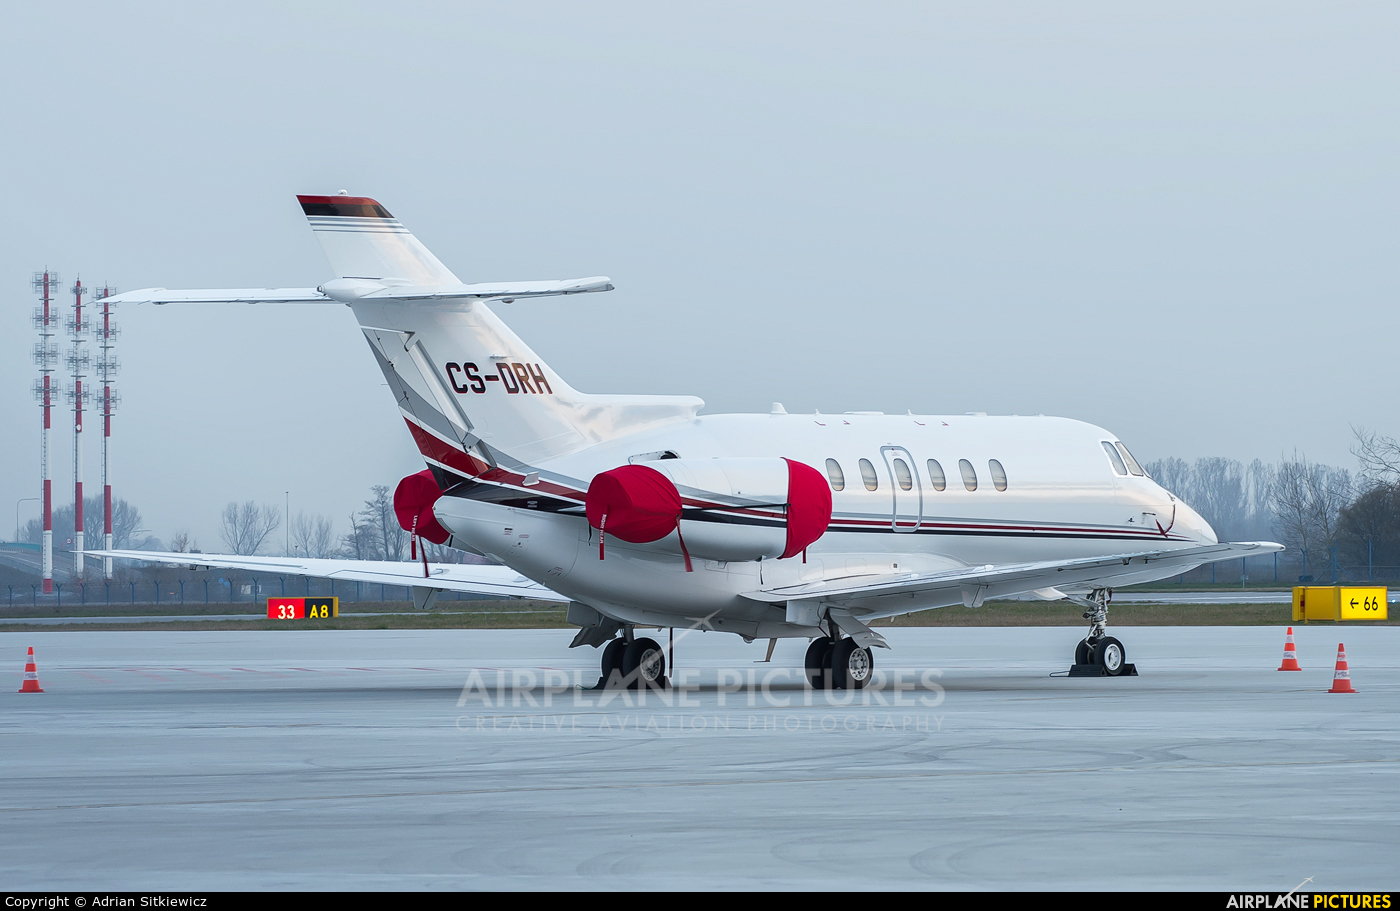 NetJets Europe (Portugal) CS-DRH aircraft at Warsaw - Frederic Chopin